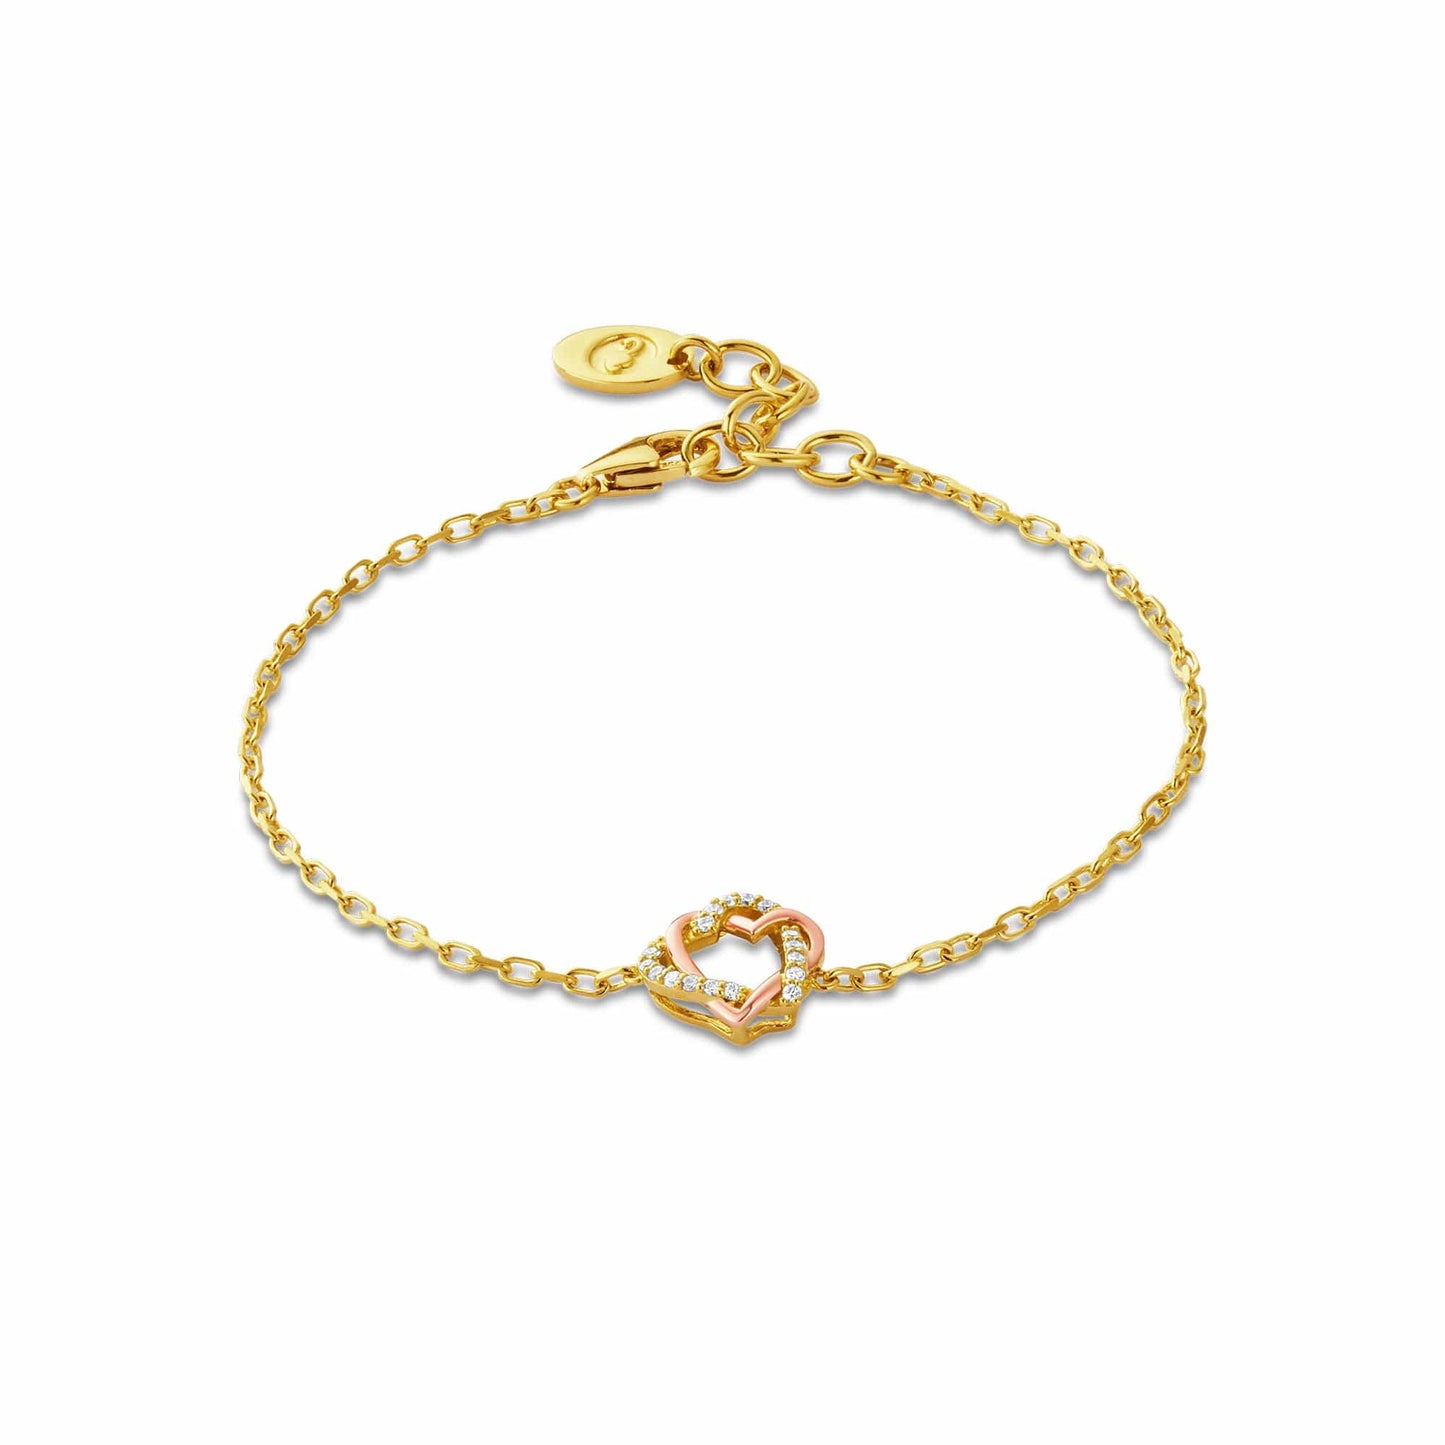 Always in My Heart 18ct Gold and Diamond Bracelet